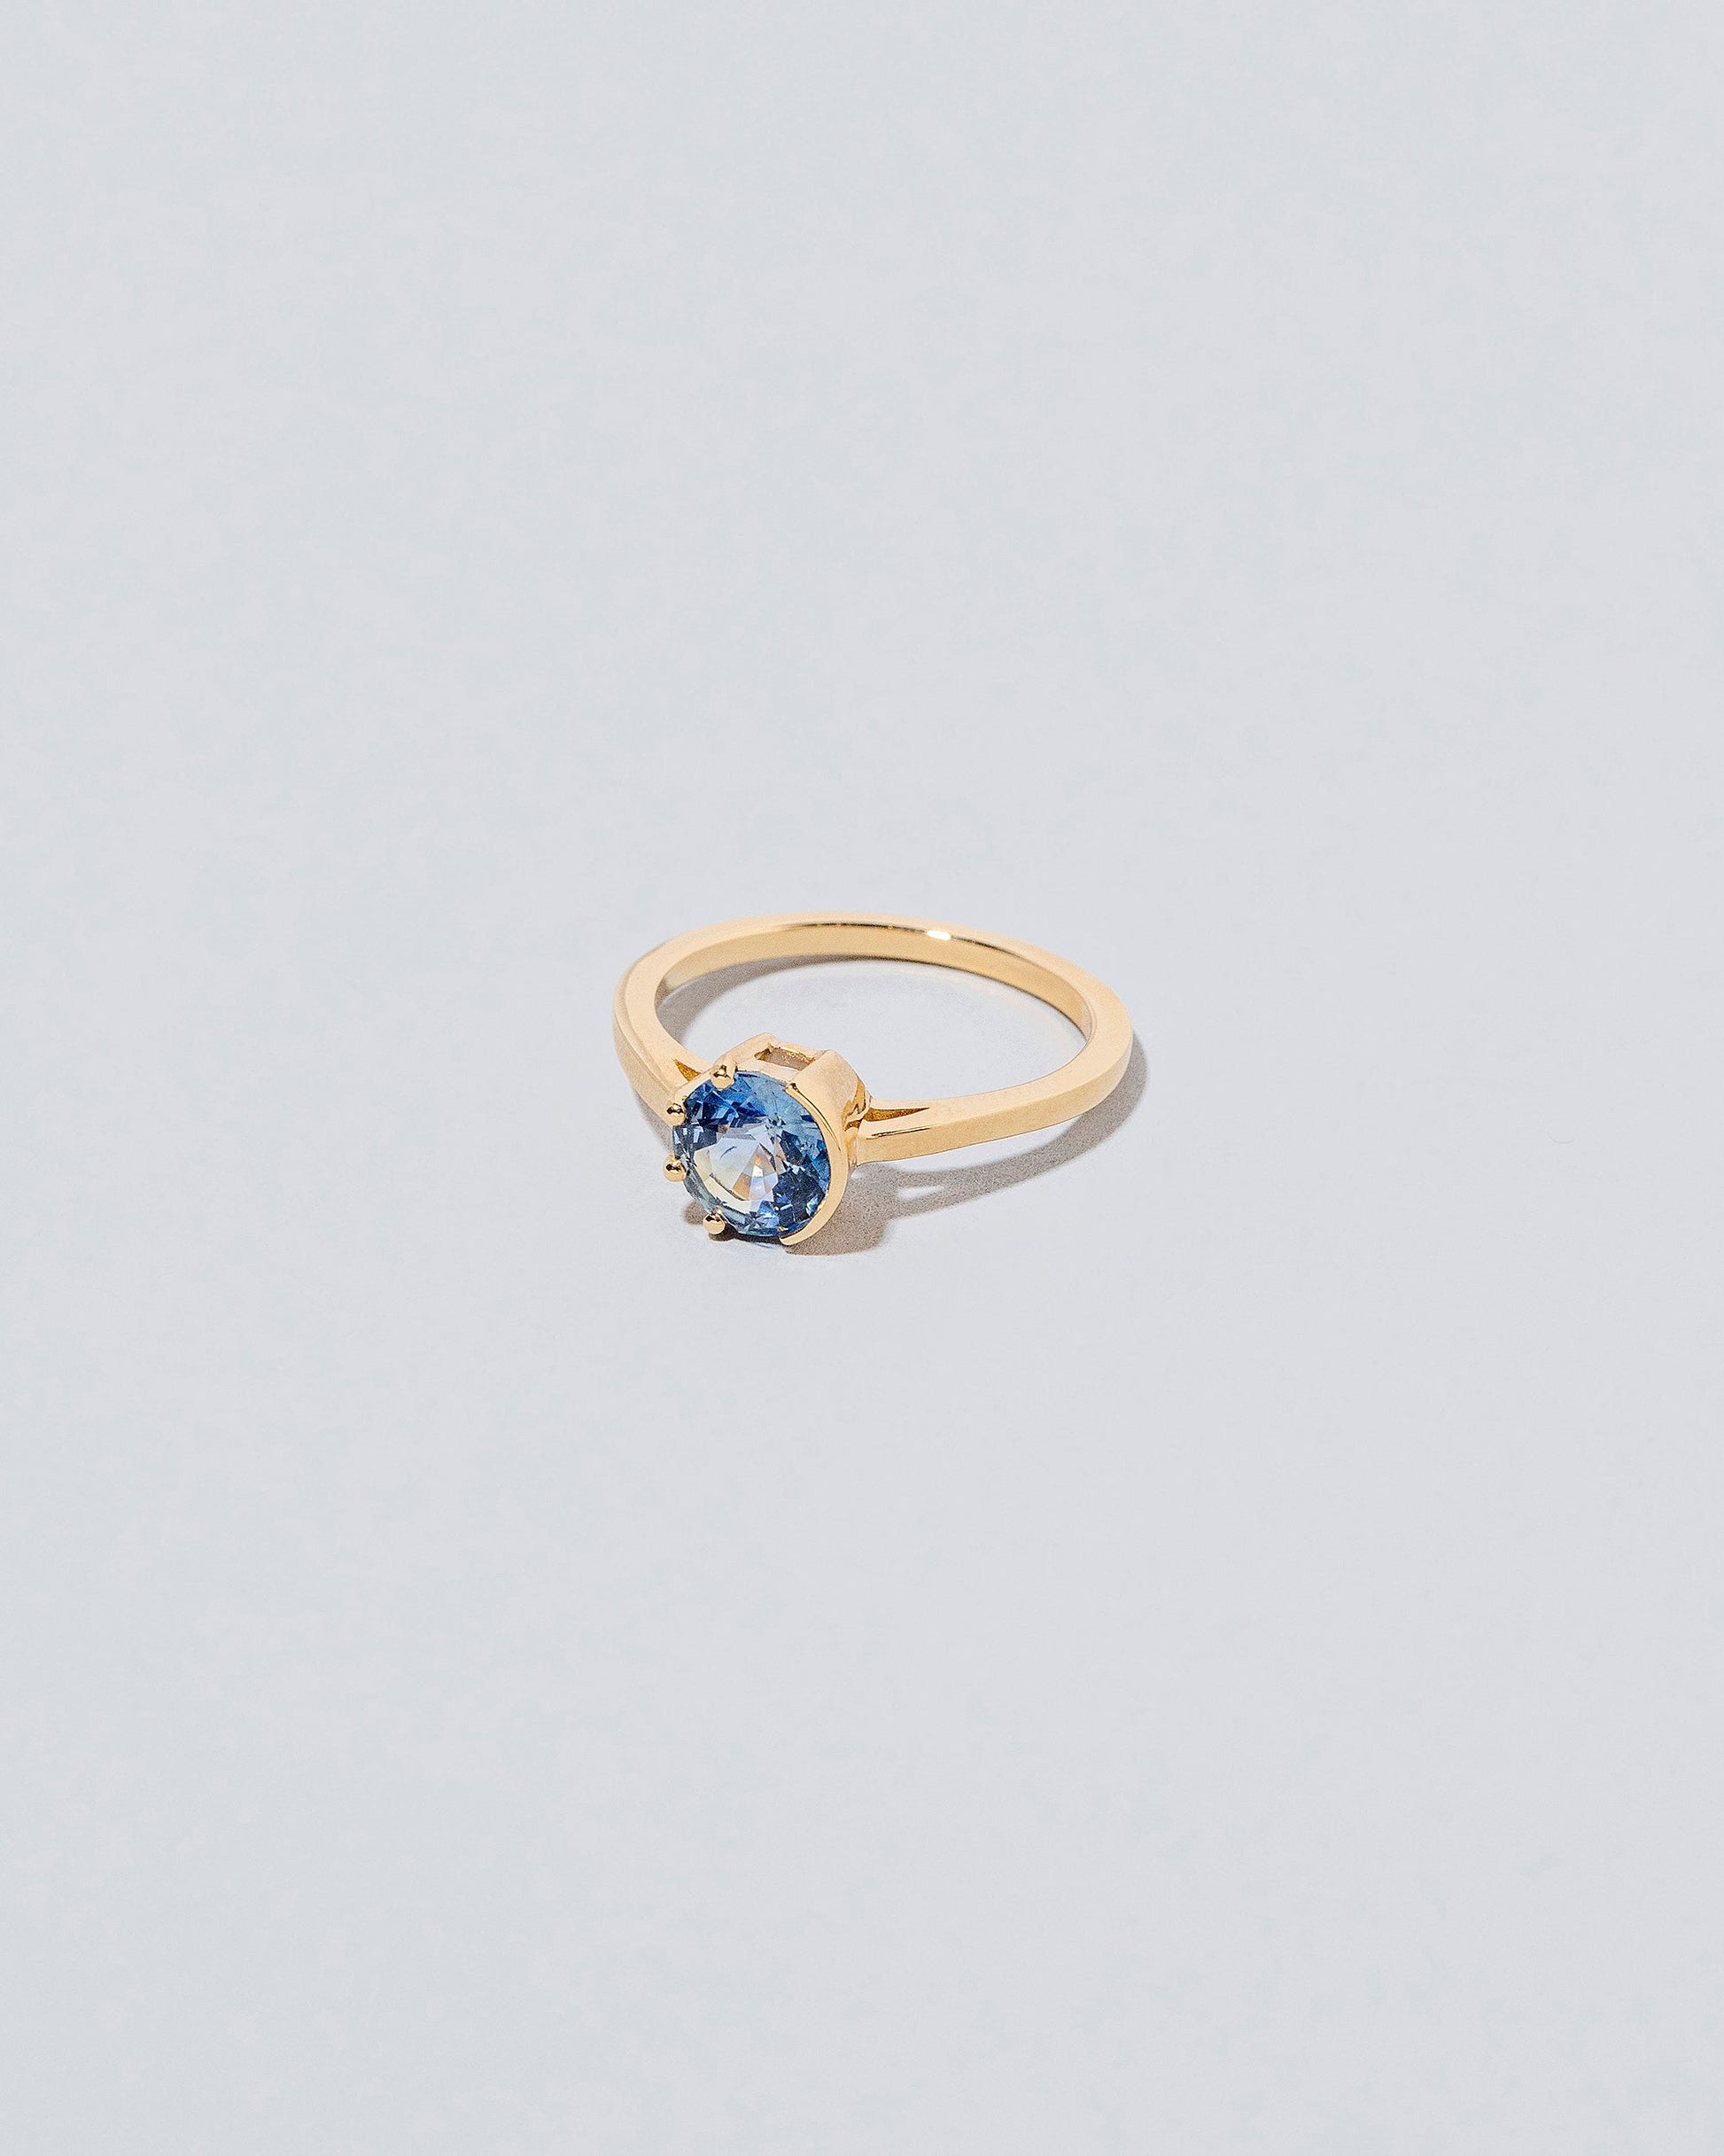 Sun & Moon Ring - Bicolor Sapphire on light color background.